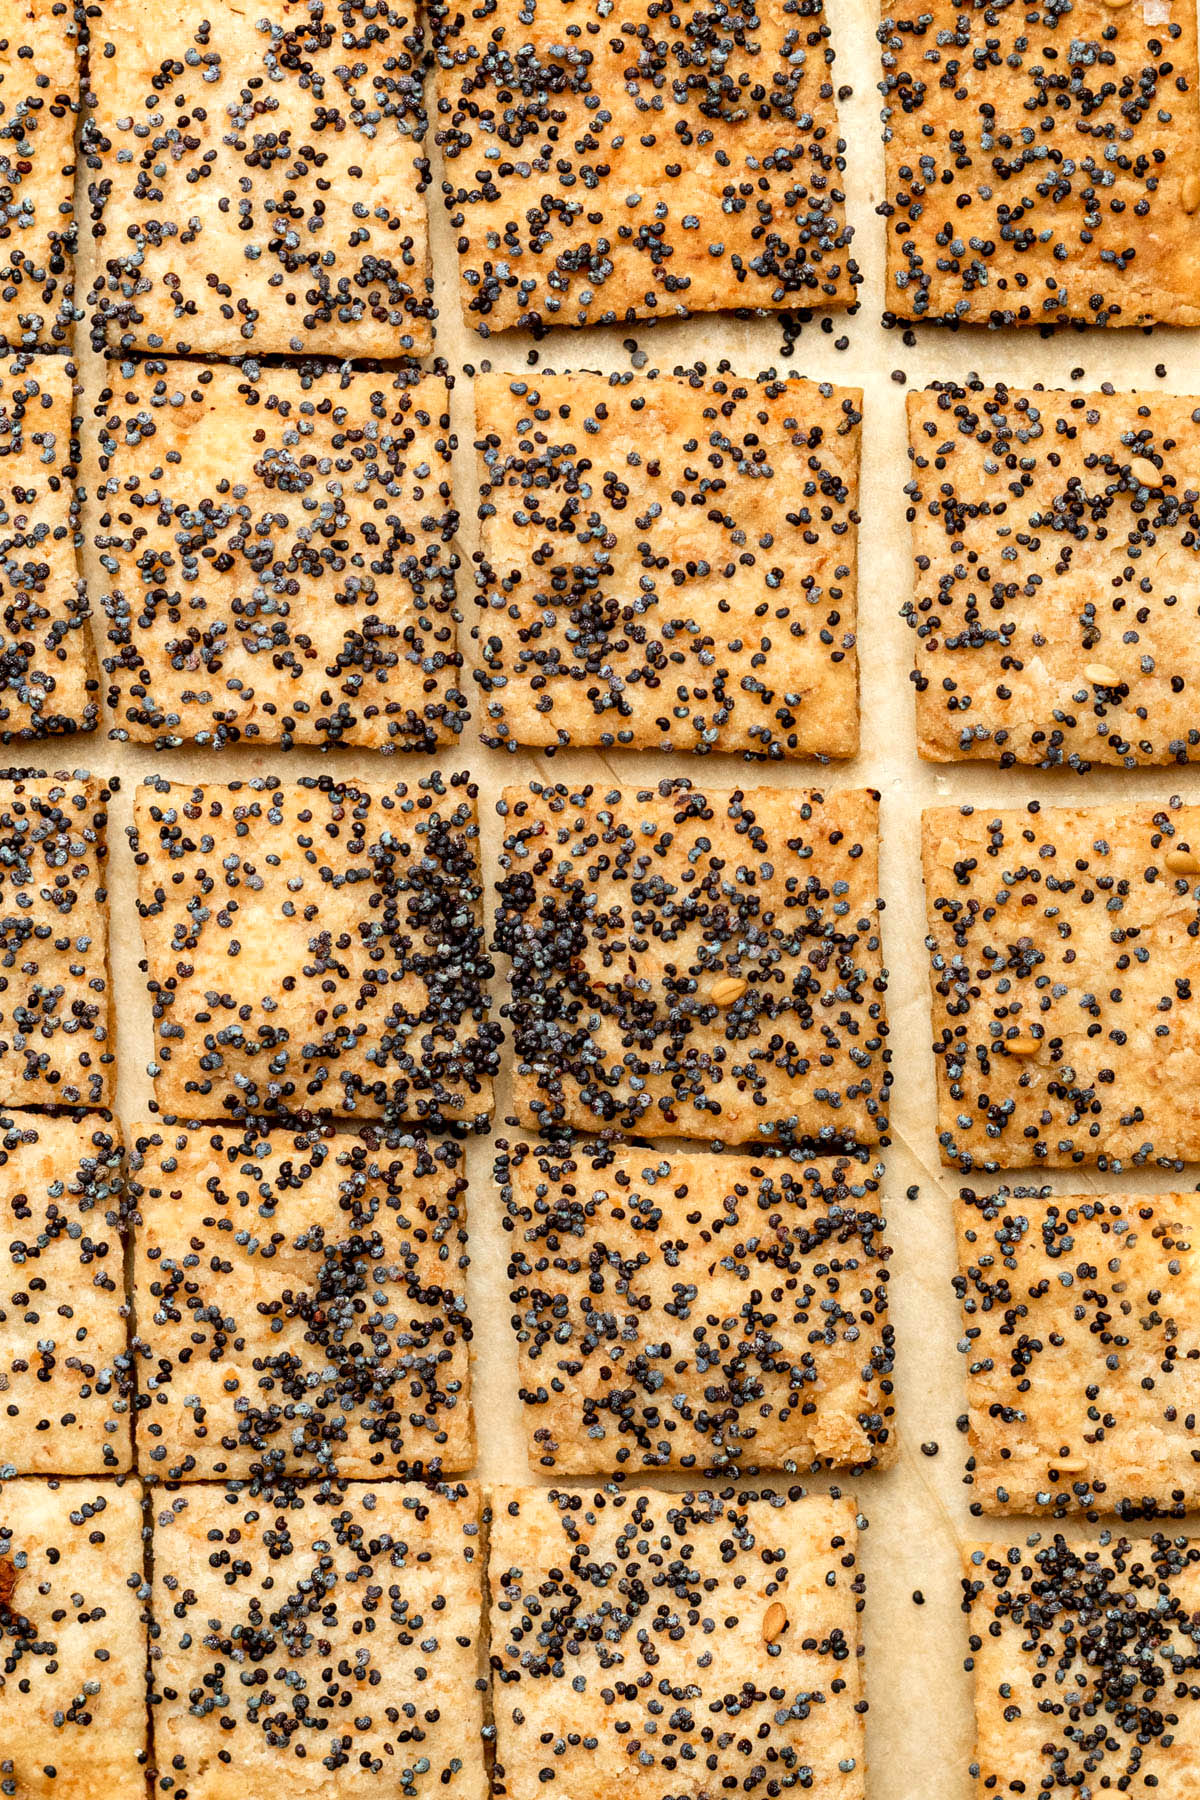 Sourdough starter discard crackers topped with poppy seeds.